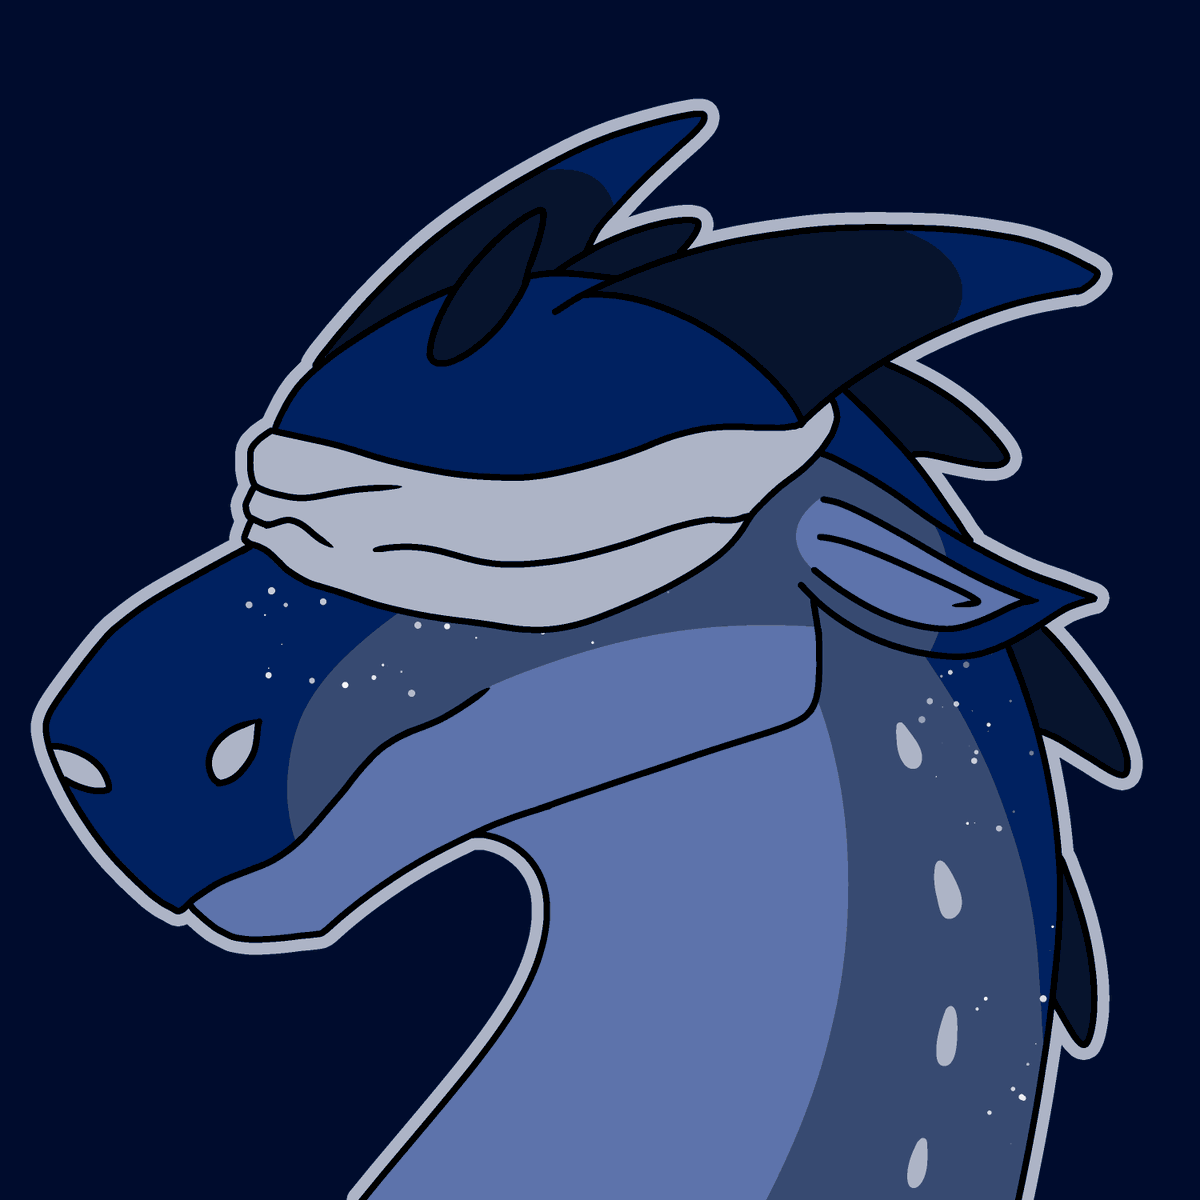 starflight moment because i absolutely can

i was flicking through my old wof designs, saw starflight's, thought 'ew i need to change that'

so i did.

#WingsofFire #wof